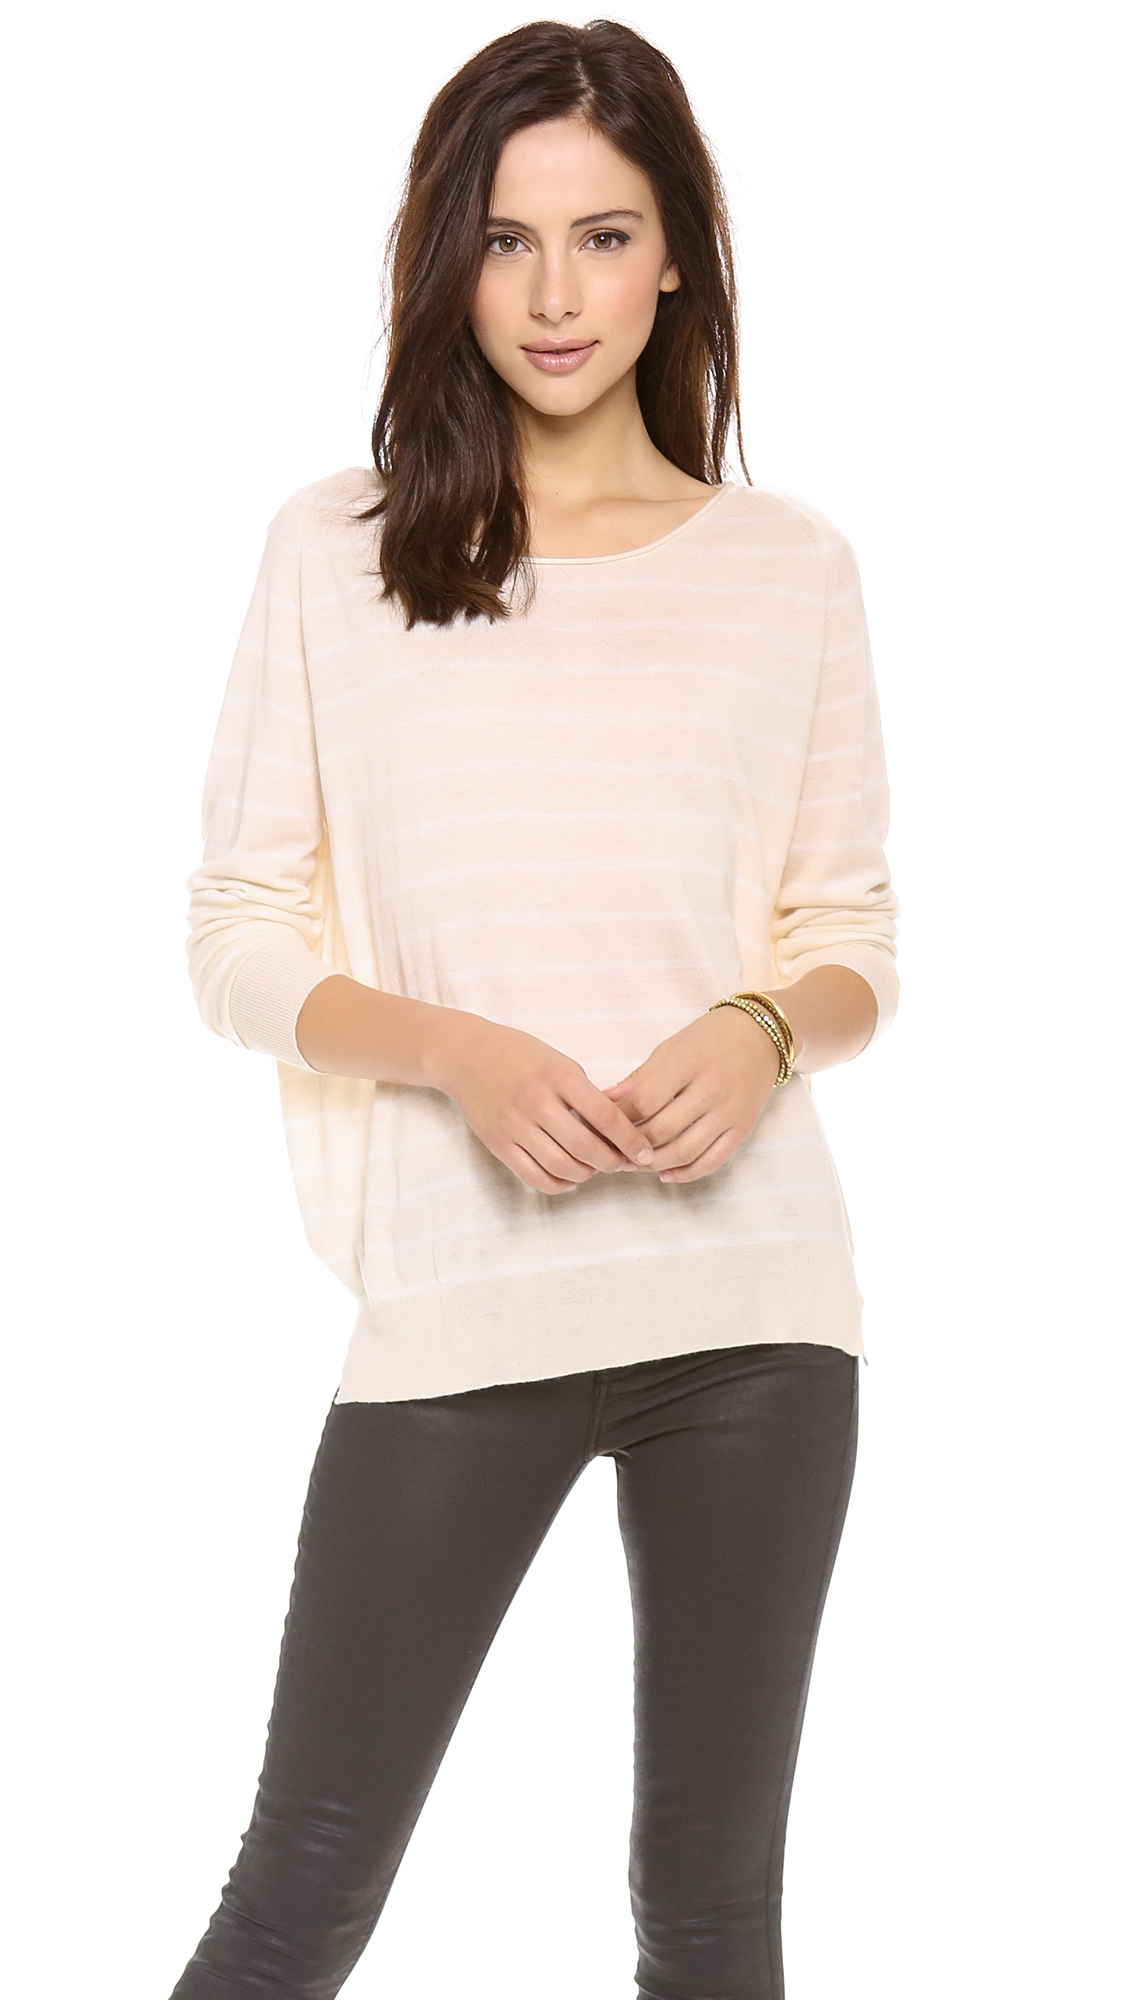 Lyst - Joie Emari Sweater in Natural